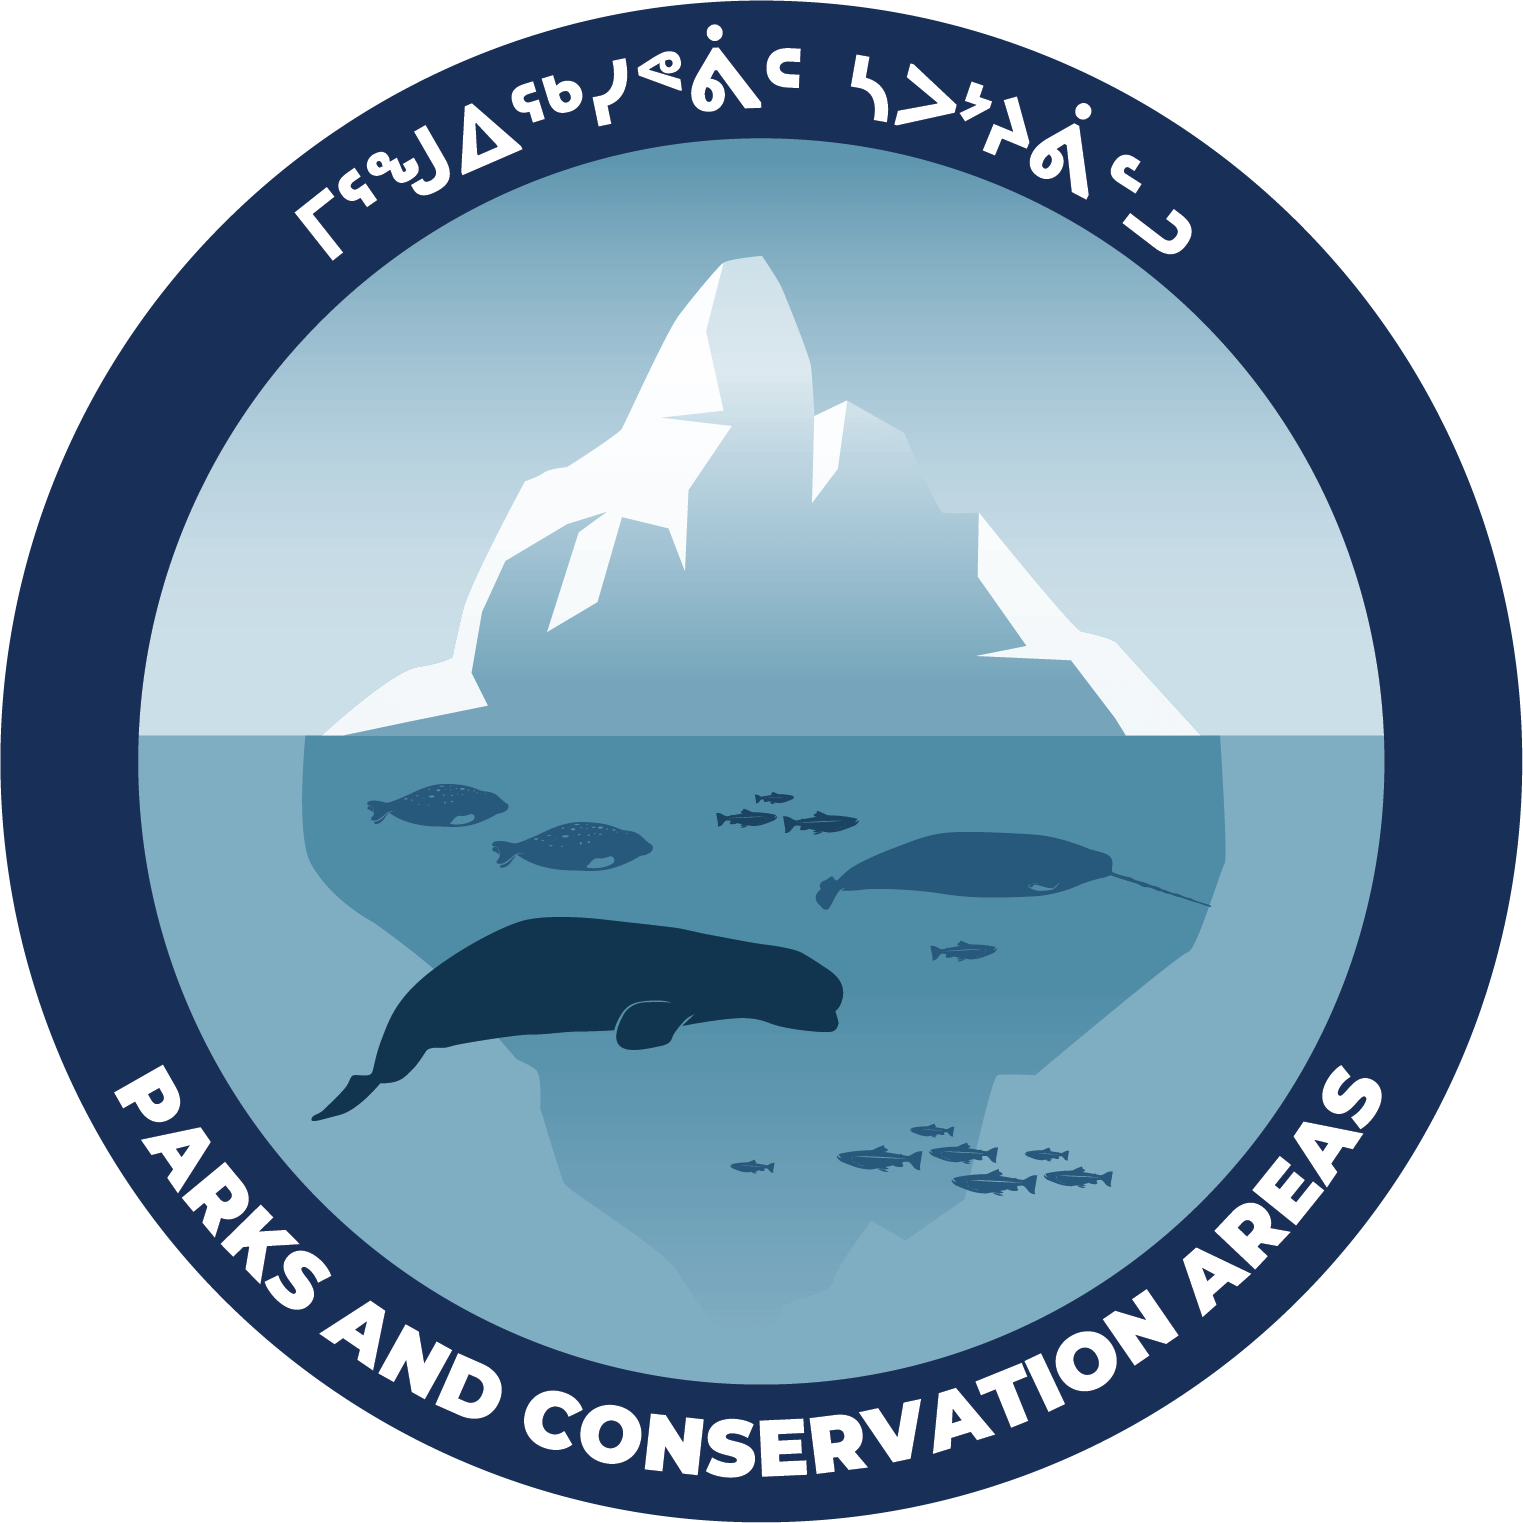 Parks and Conservation Areas